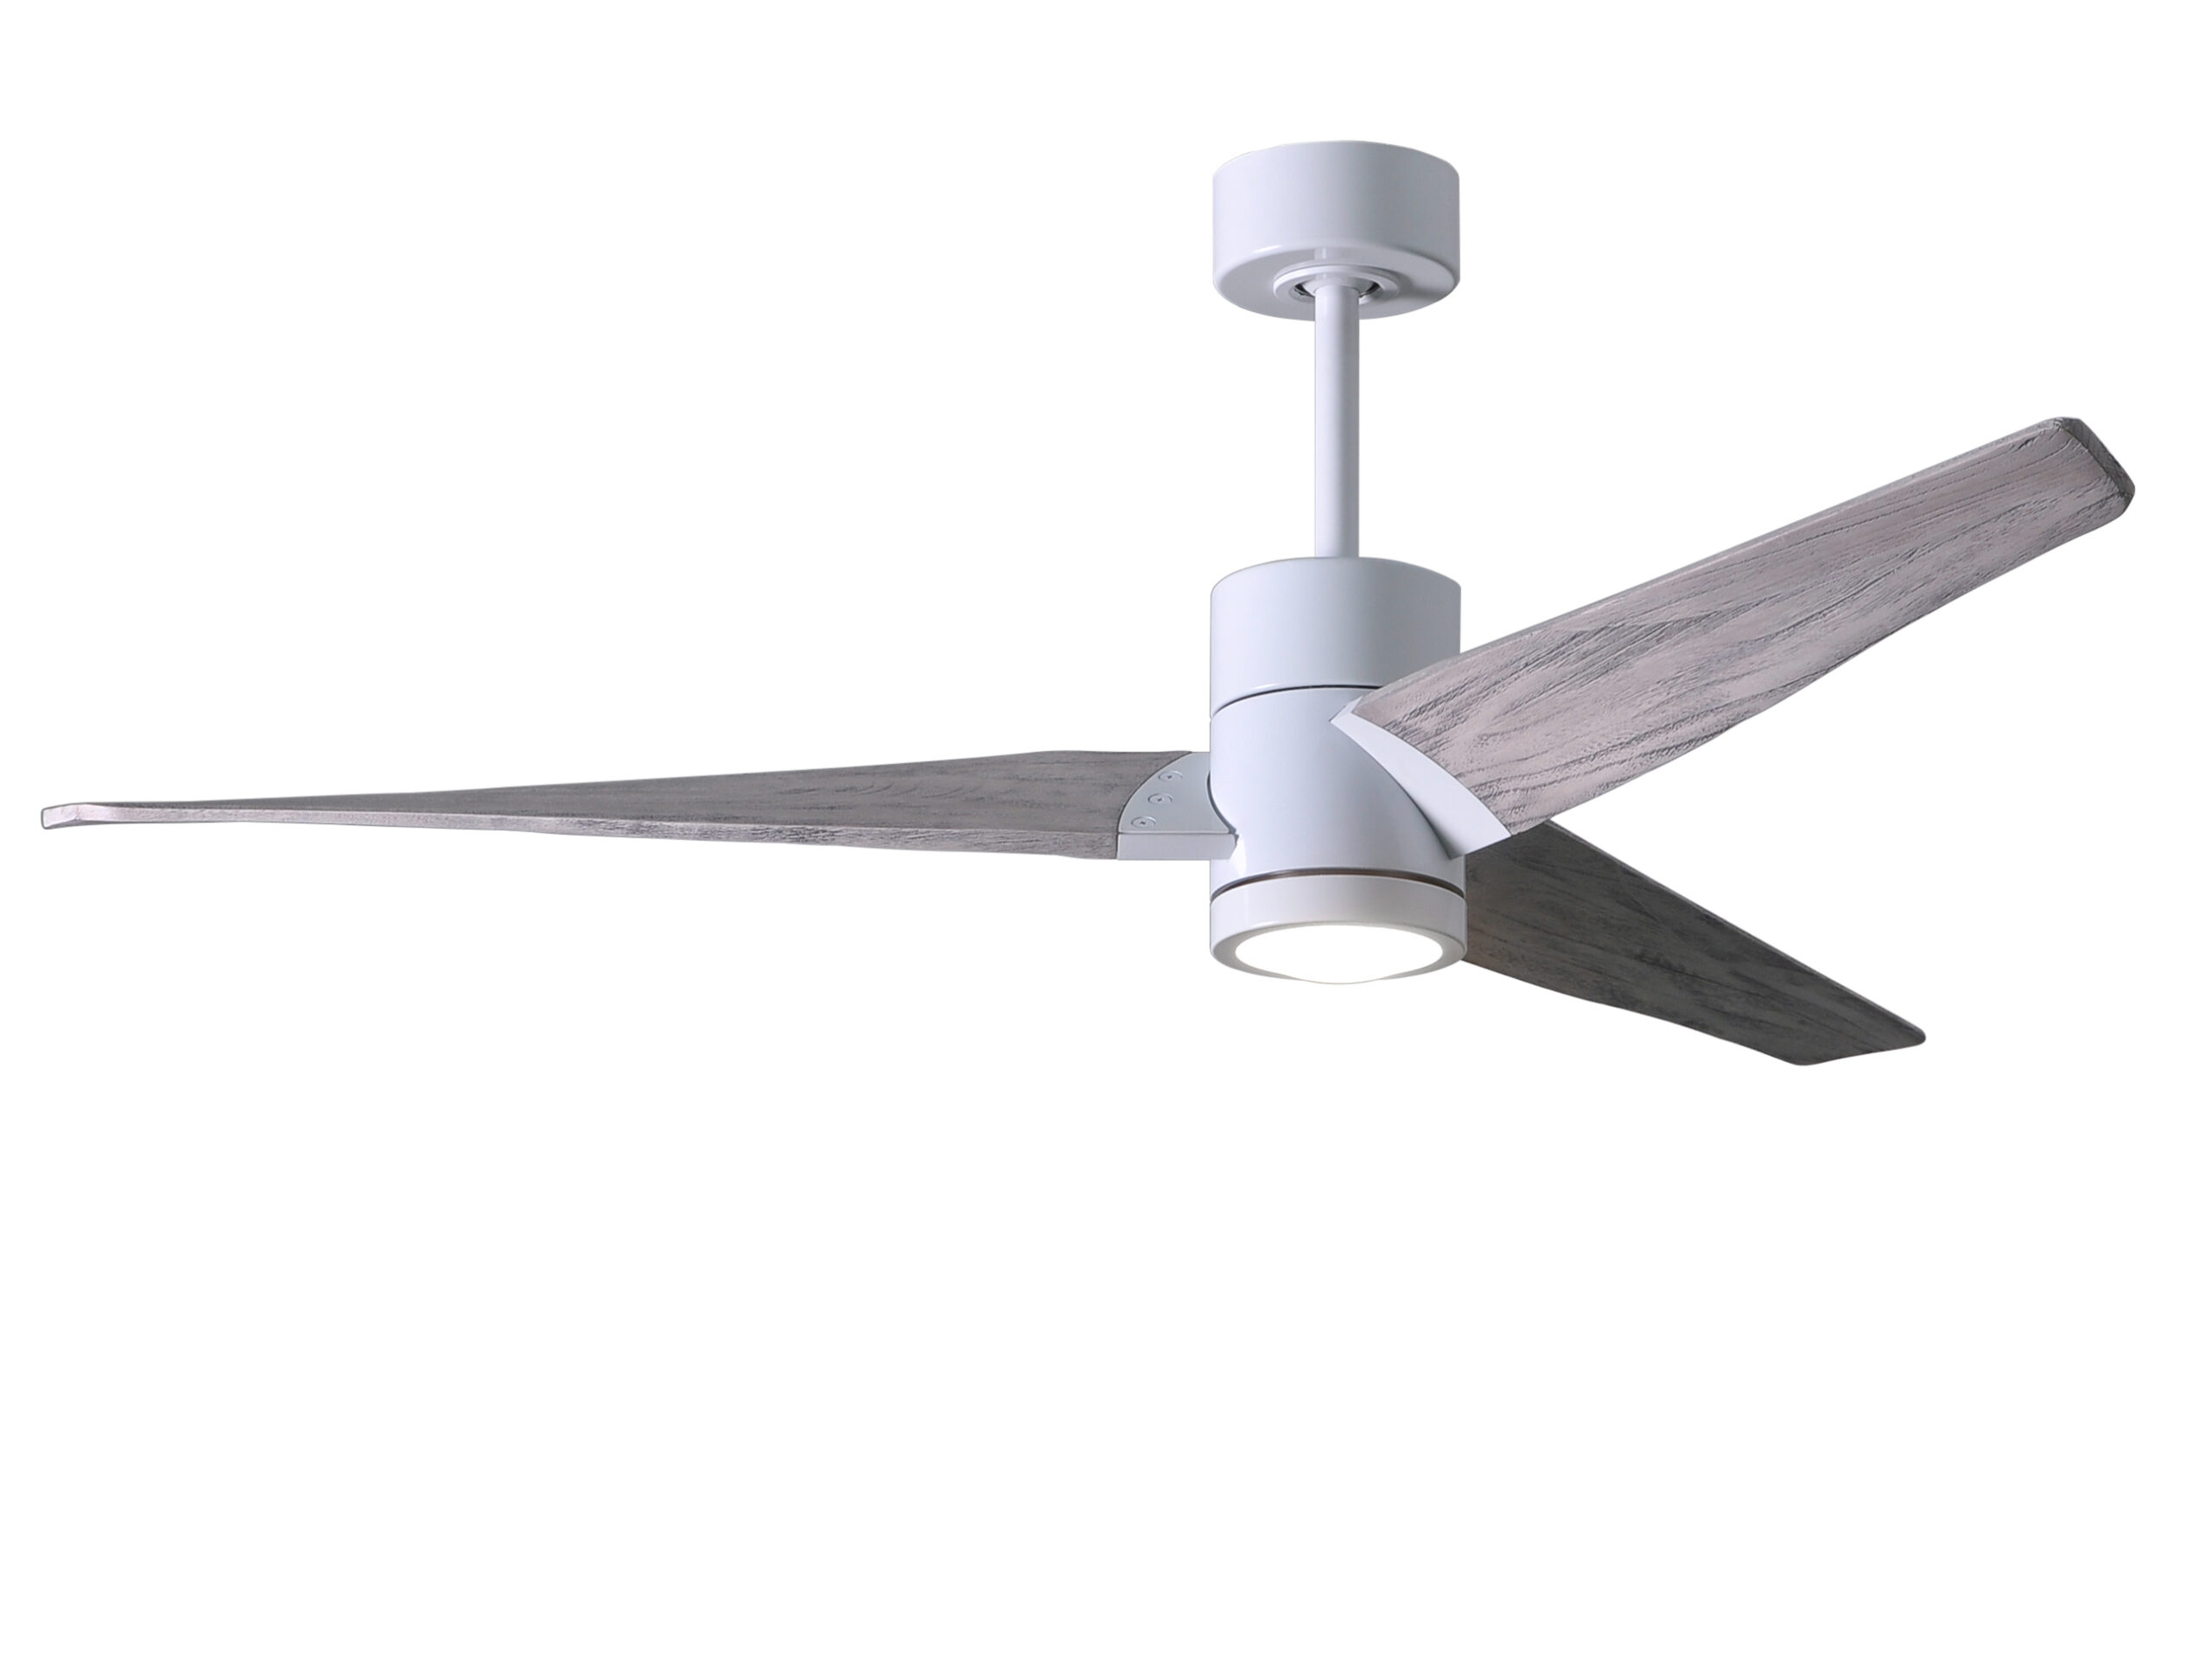 Super Janet ceiling fan in Gloss White with 52” Barn Wood blad